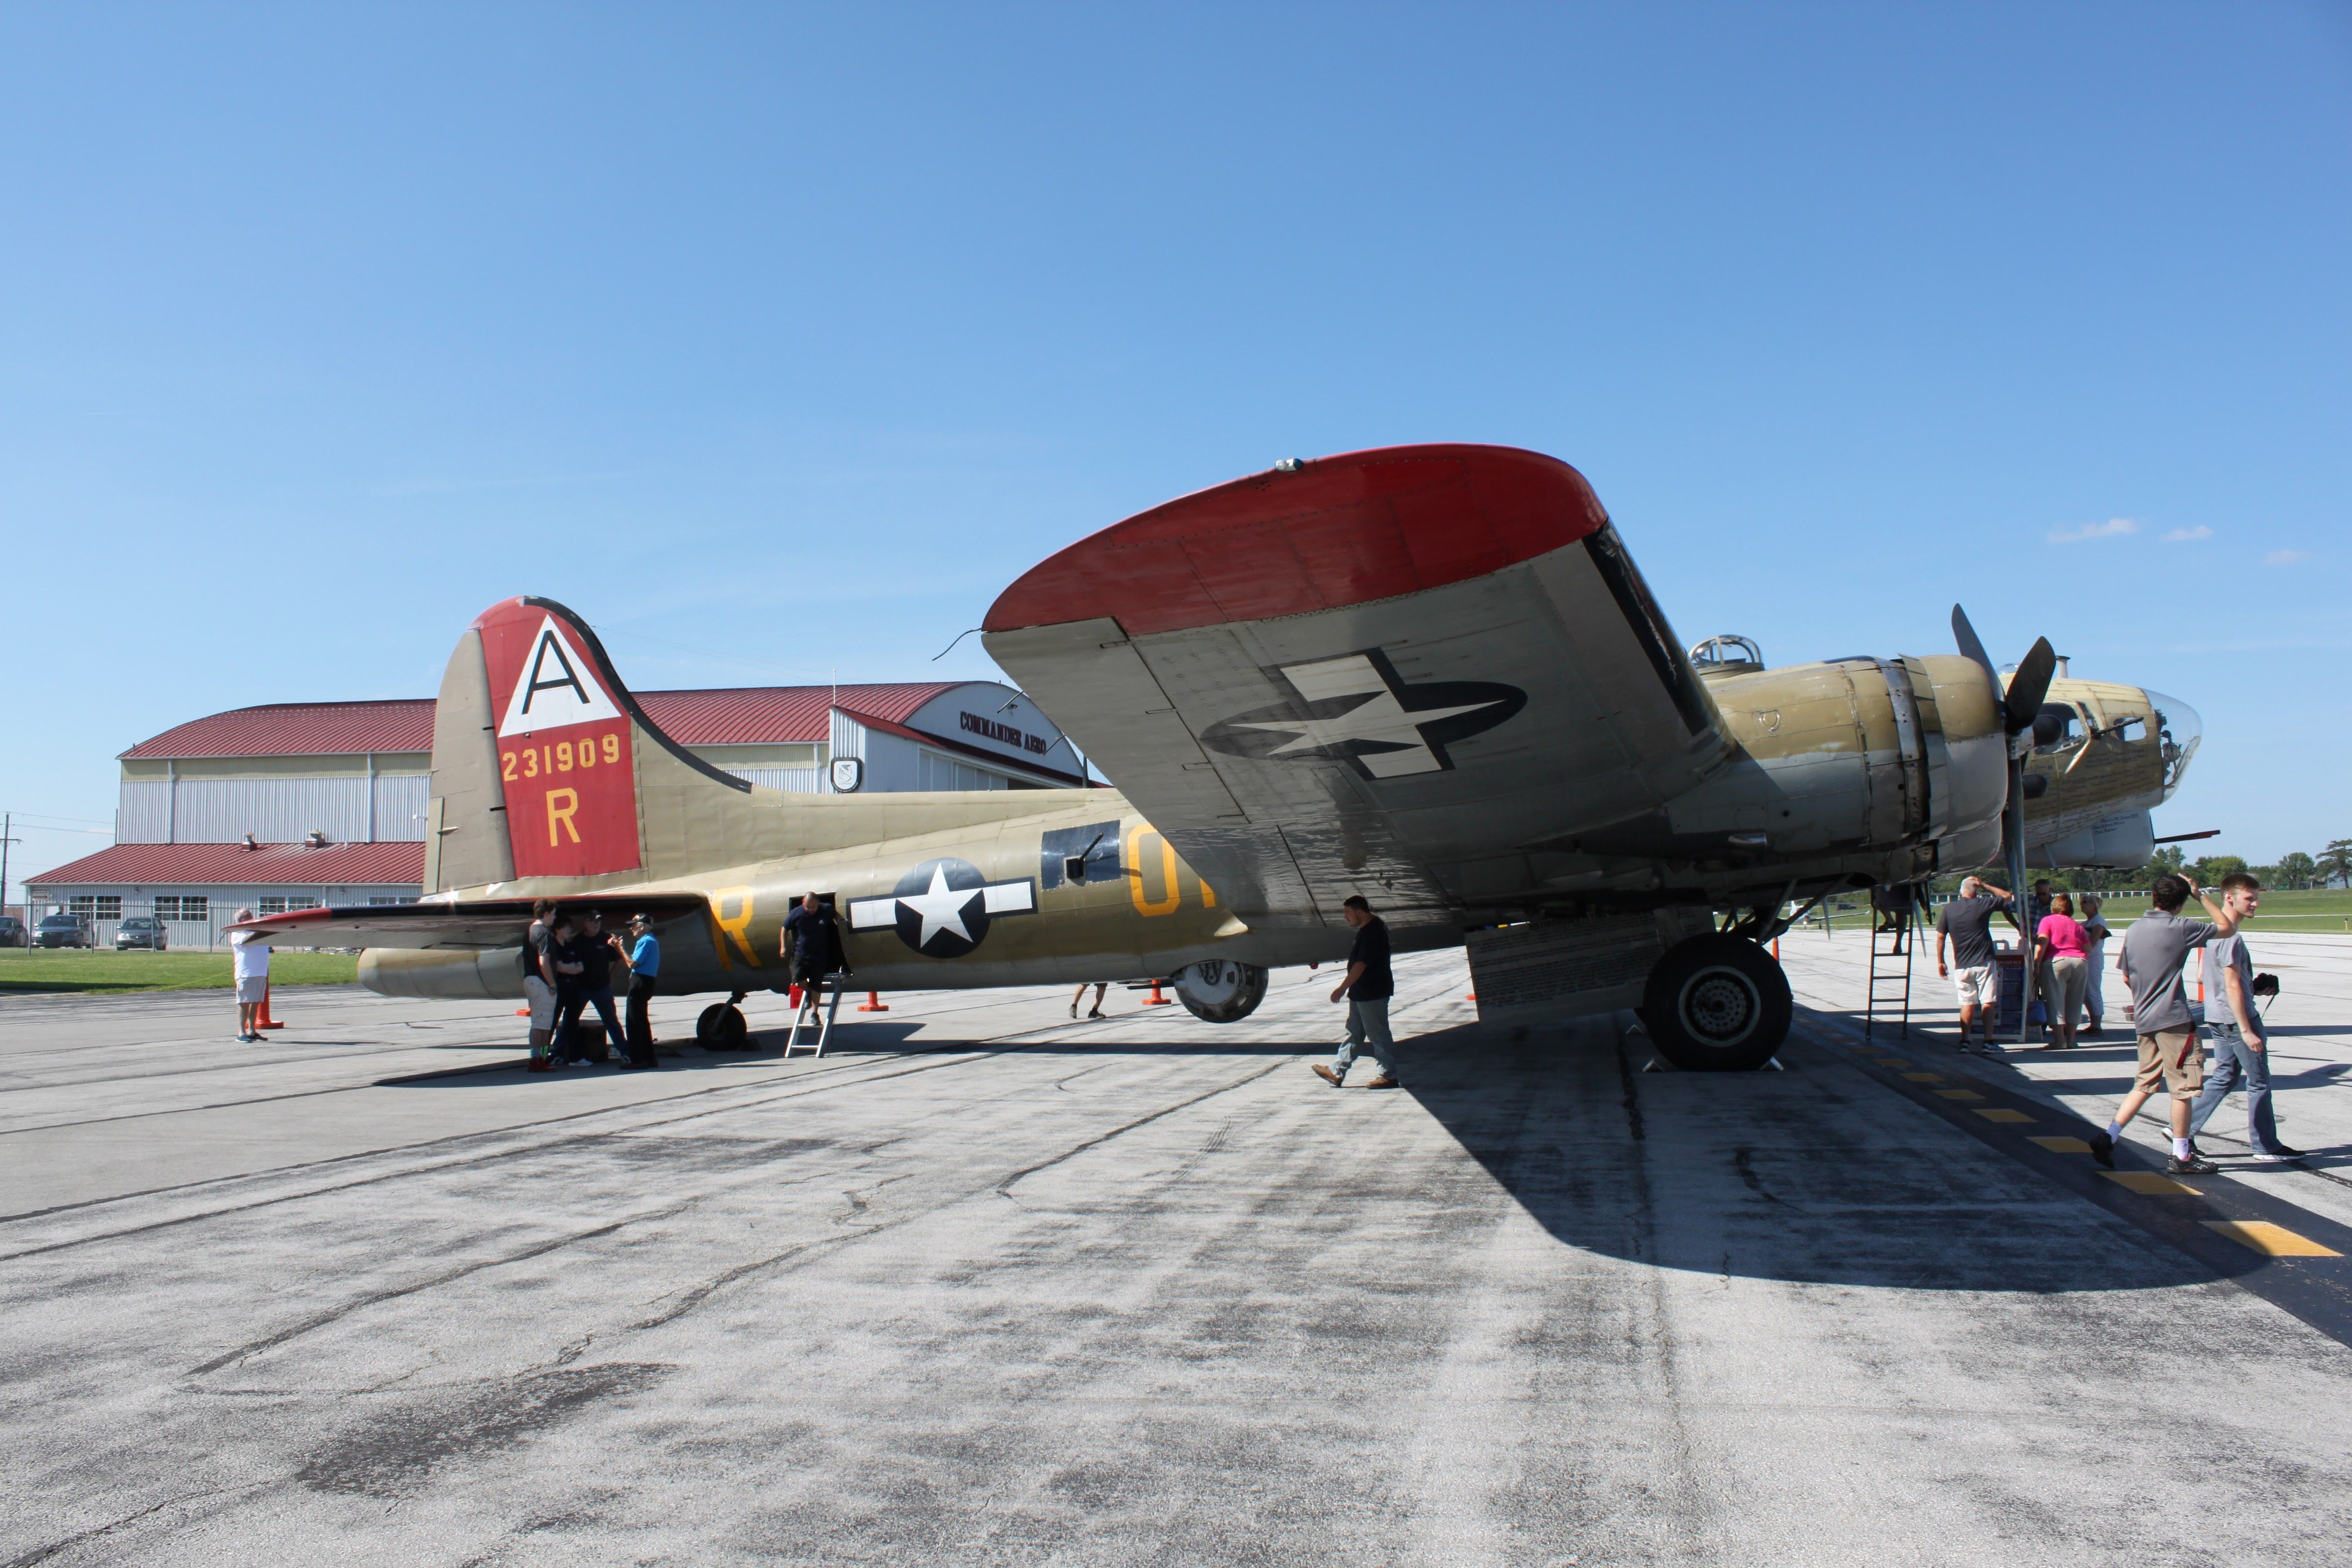 Boeing B-17 Flying Fortress (23-1909) - Collings Foundation’s Boeing B-17 Flying Fortress “Nine O Nine” on display at the Dayton Wright Brothers Airport during the 2017 Wings of Freedom Tour 